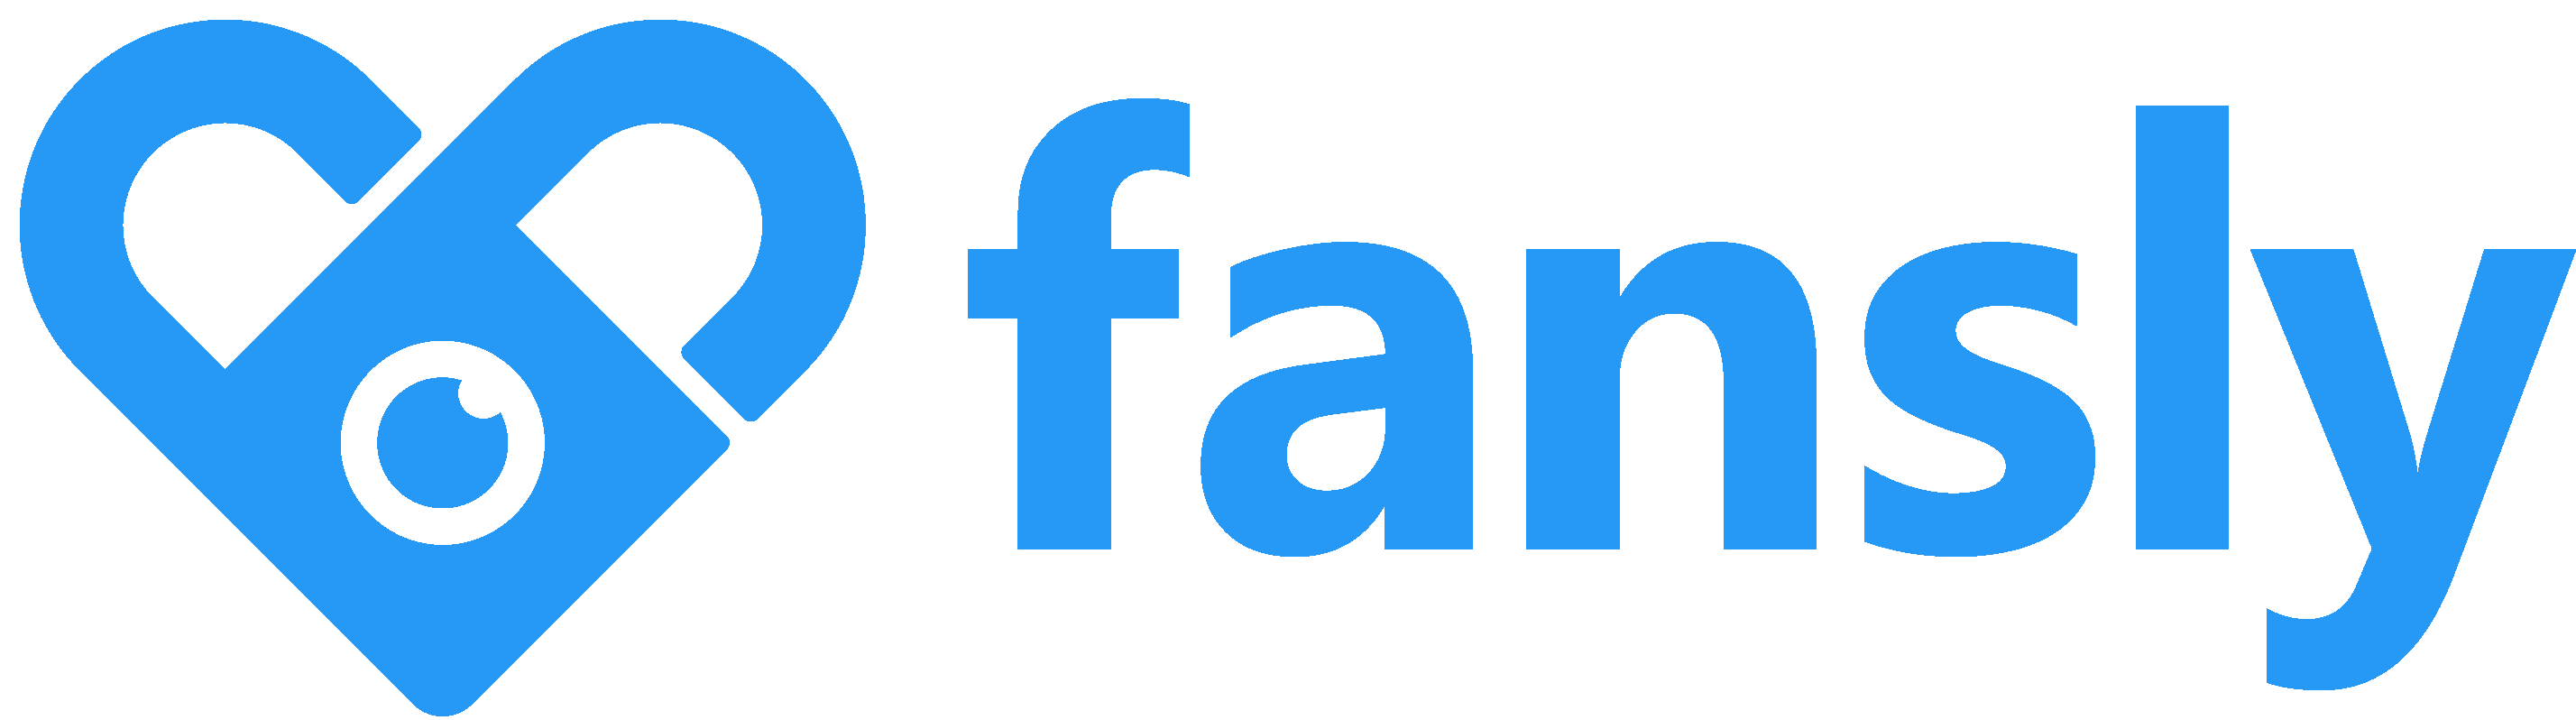 Fansly search users